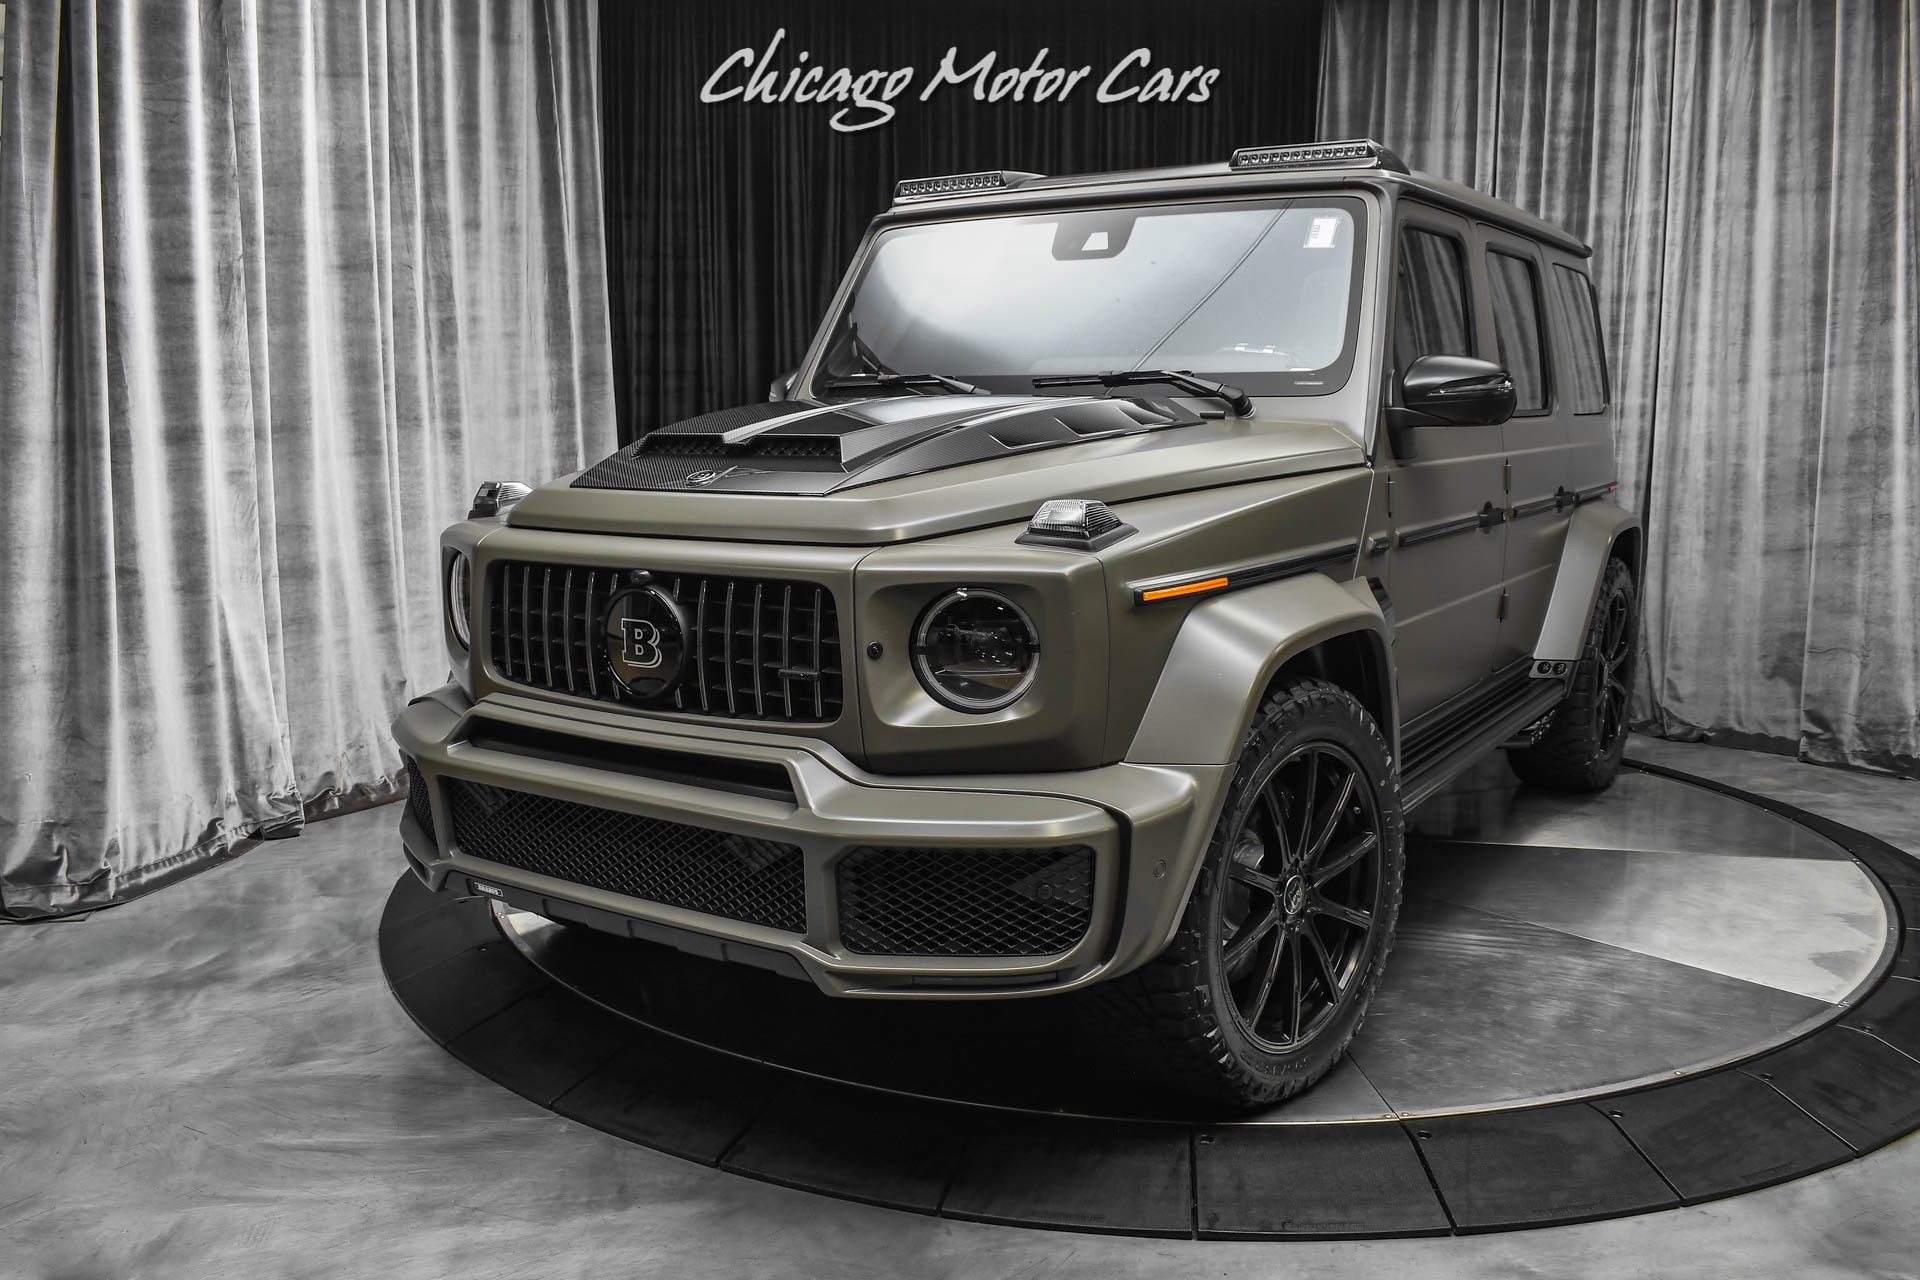 Used 21 Mercedes Benz G63 Amg Suv Matte Olive Green Brabus Package Carbon Fiber Only 2800 Miles For Sale Special Pricing Chicago Motor Cars Stock